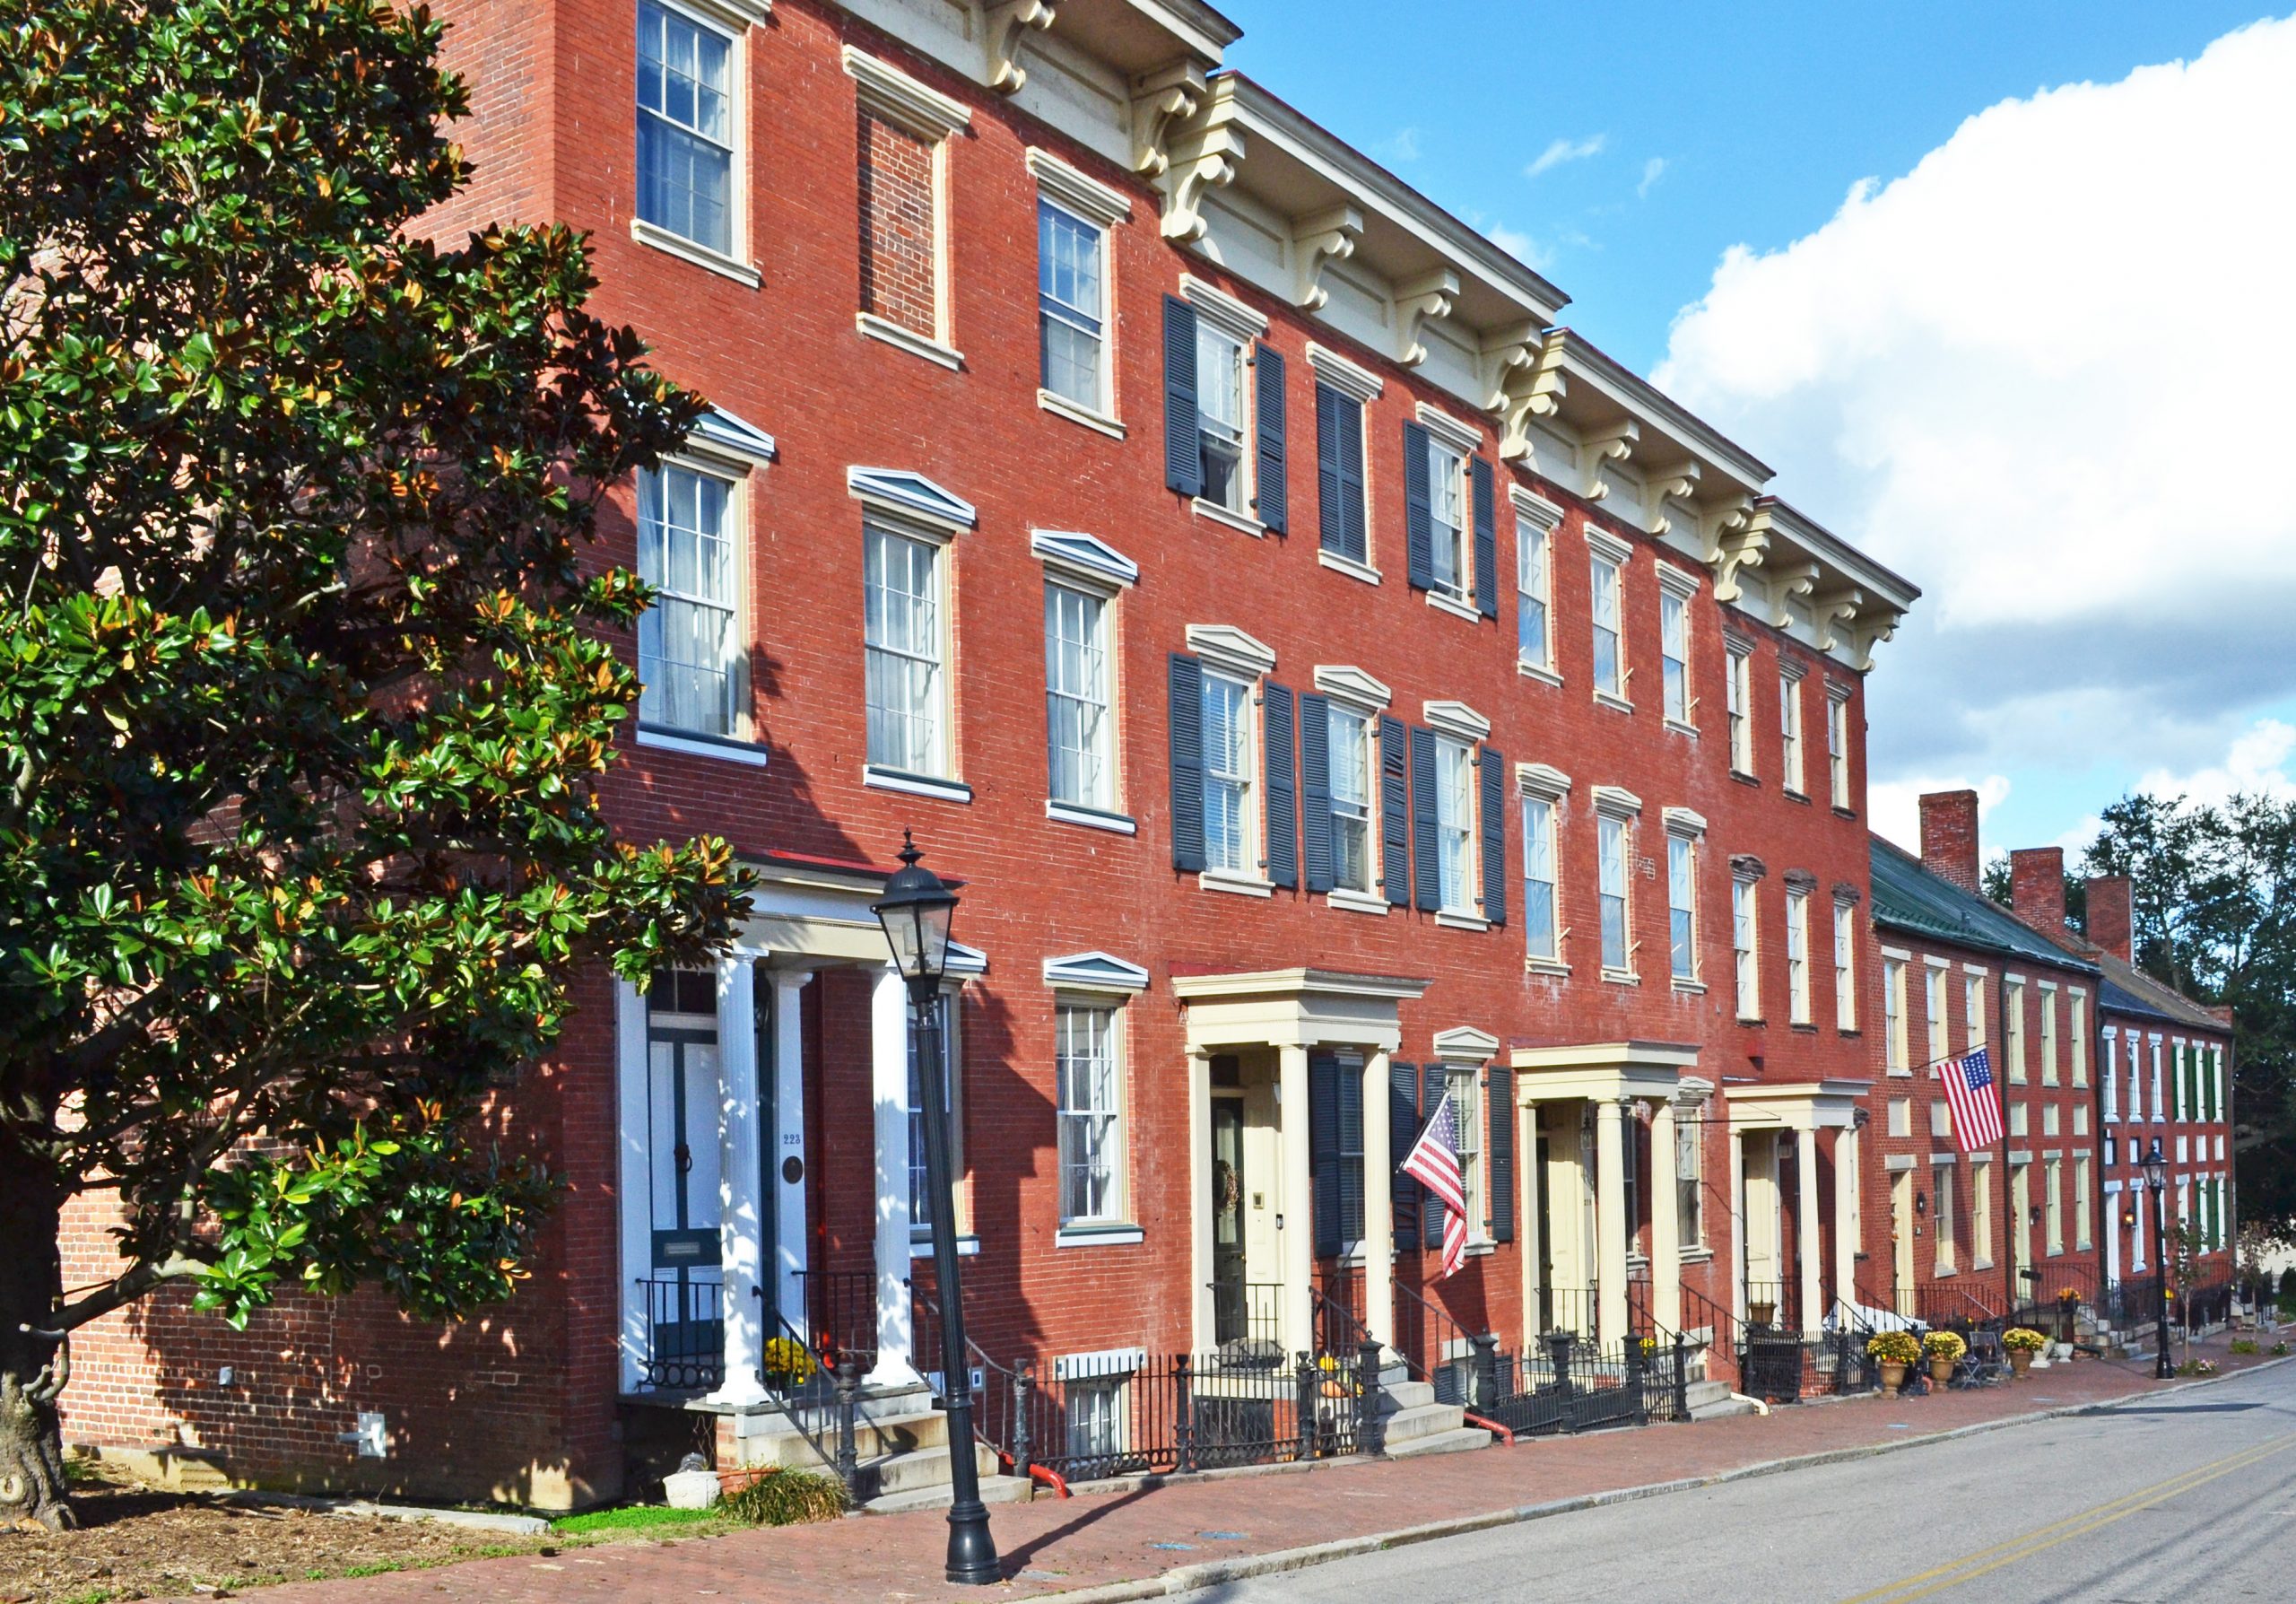 Petersburg Old Town Historic District